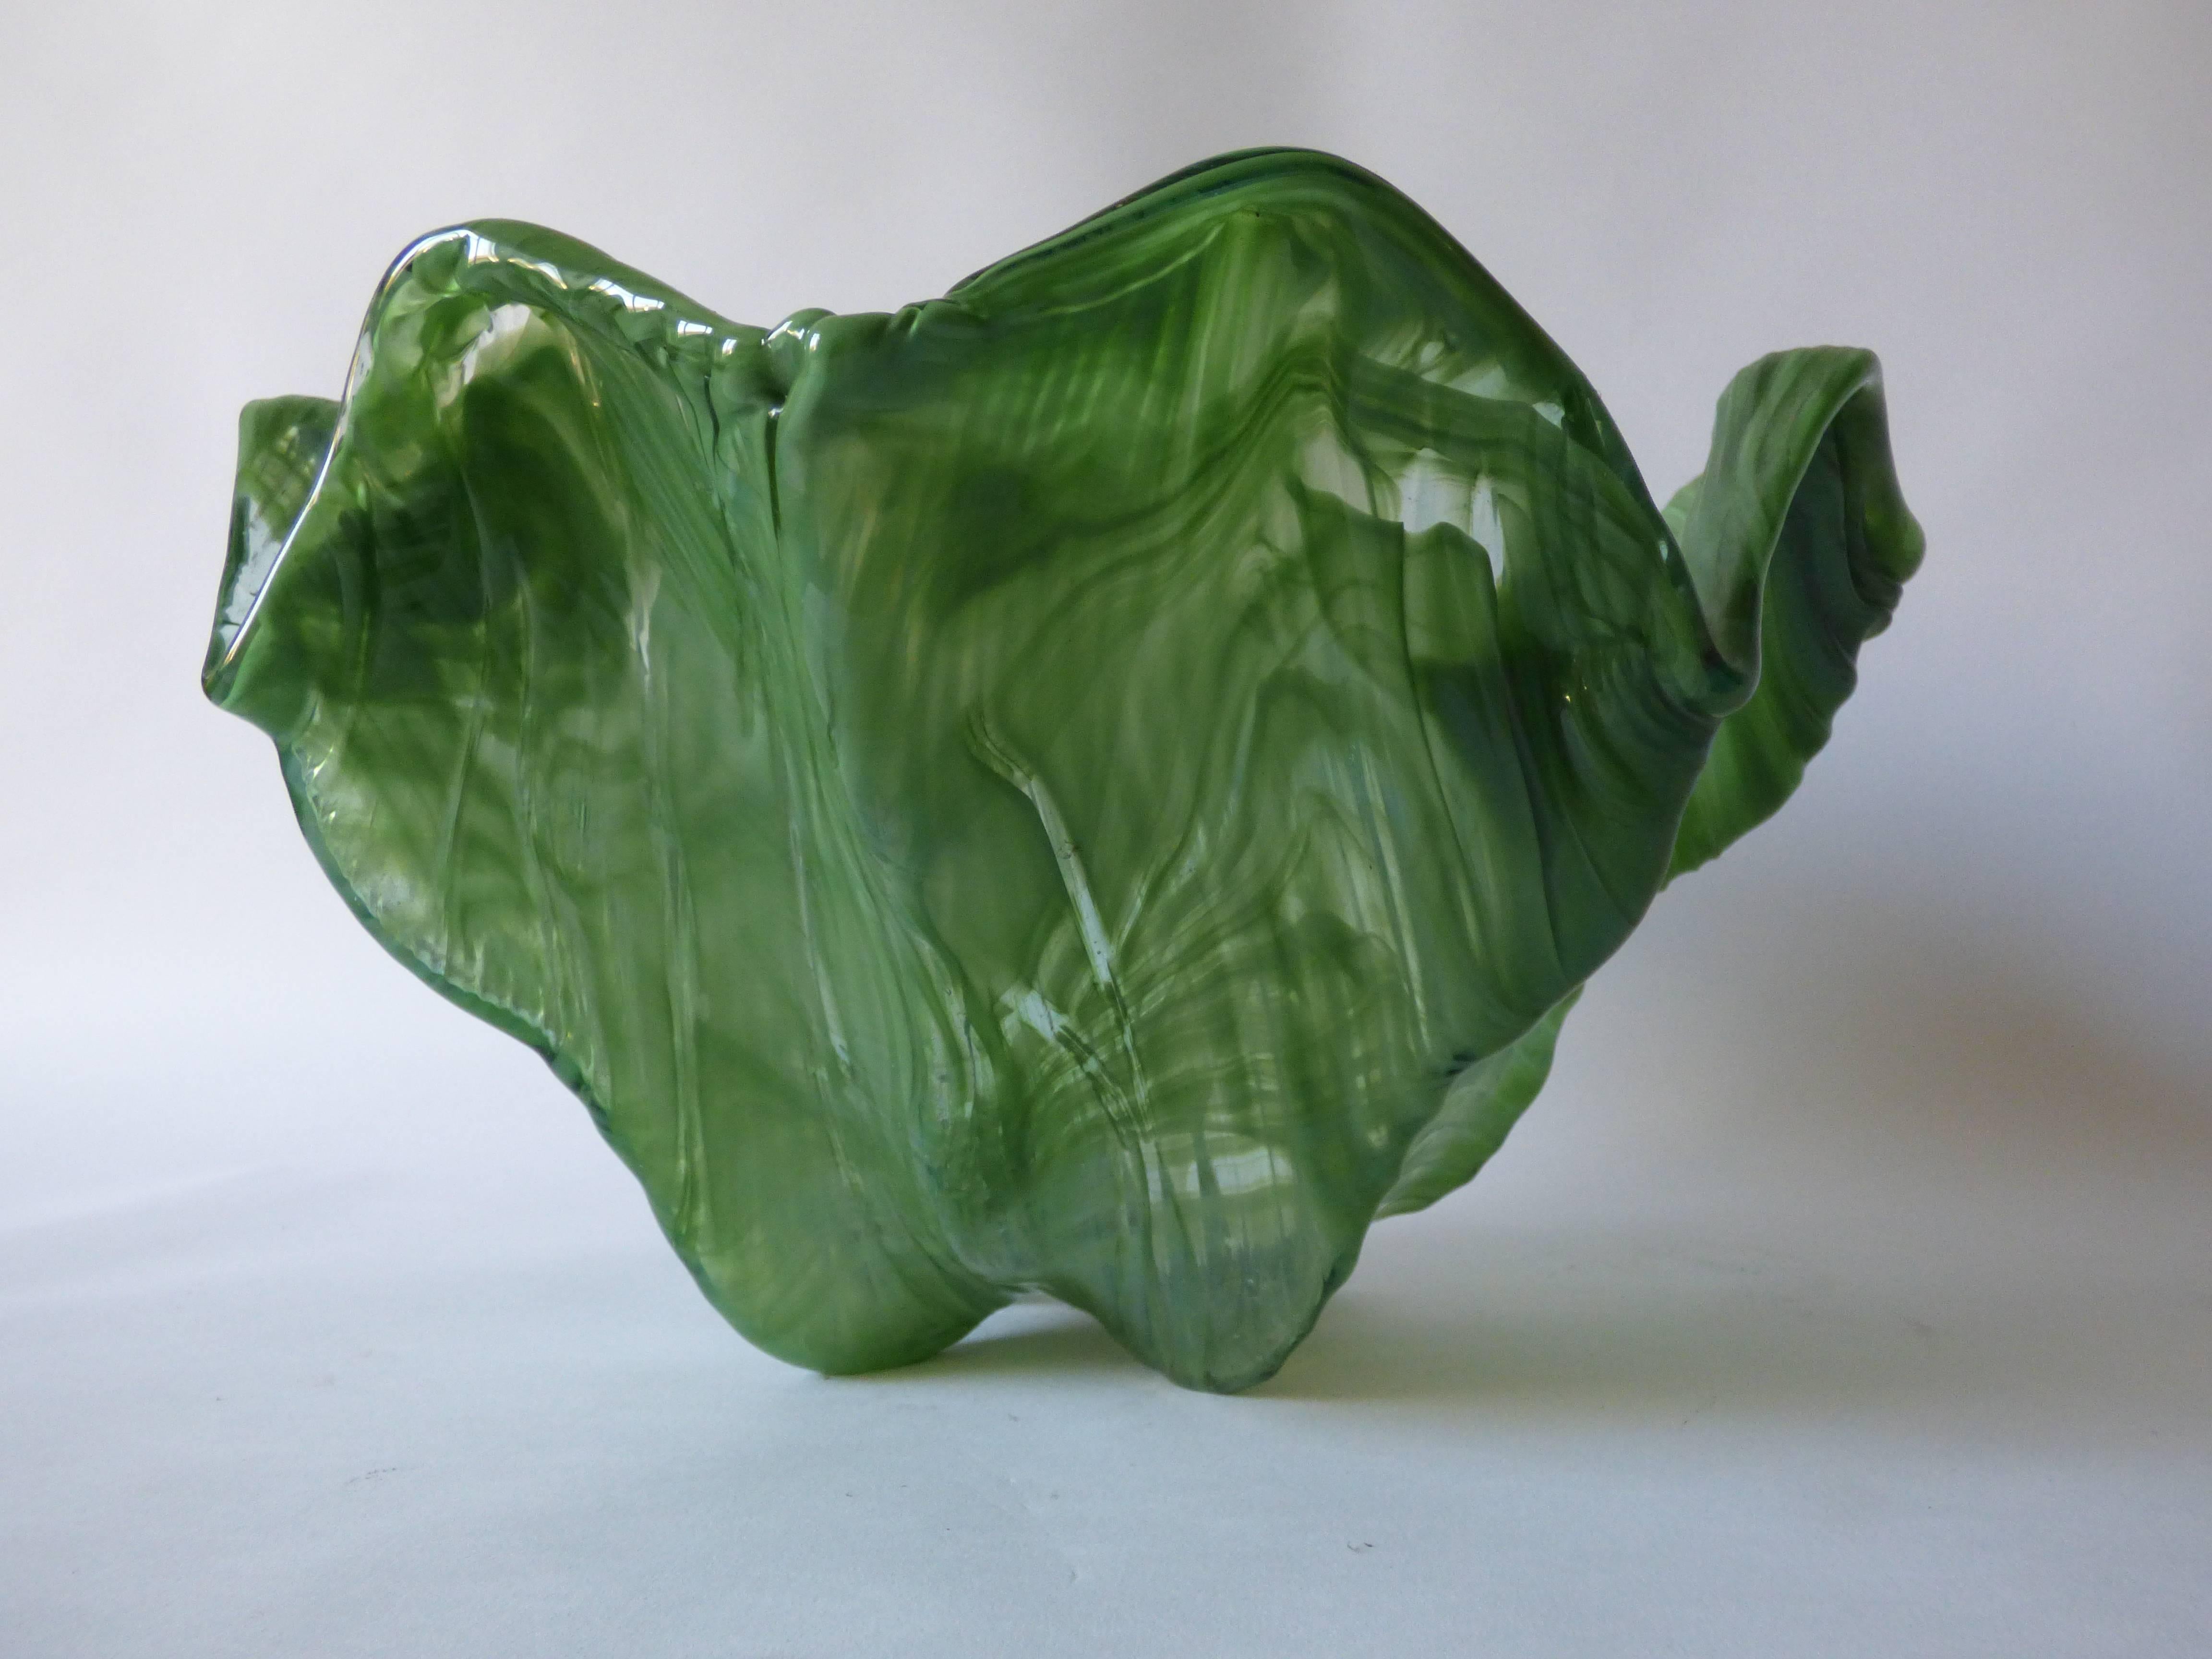 Ninfea vase designed by Toni Zuccheri and produced by Venini in 1960. Exhibited at Tingo Design Gallery in 2008 for the exhibition 